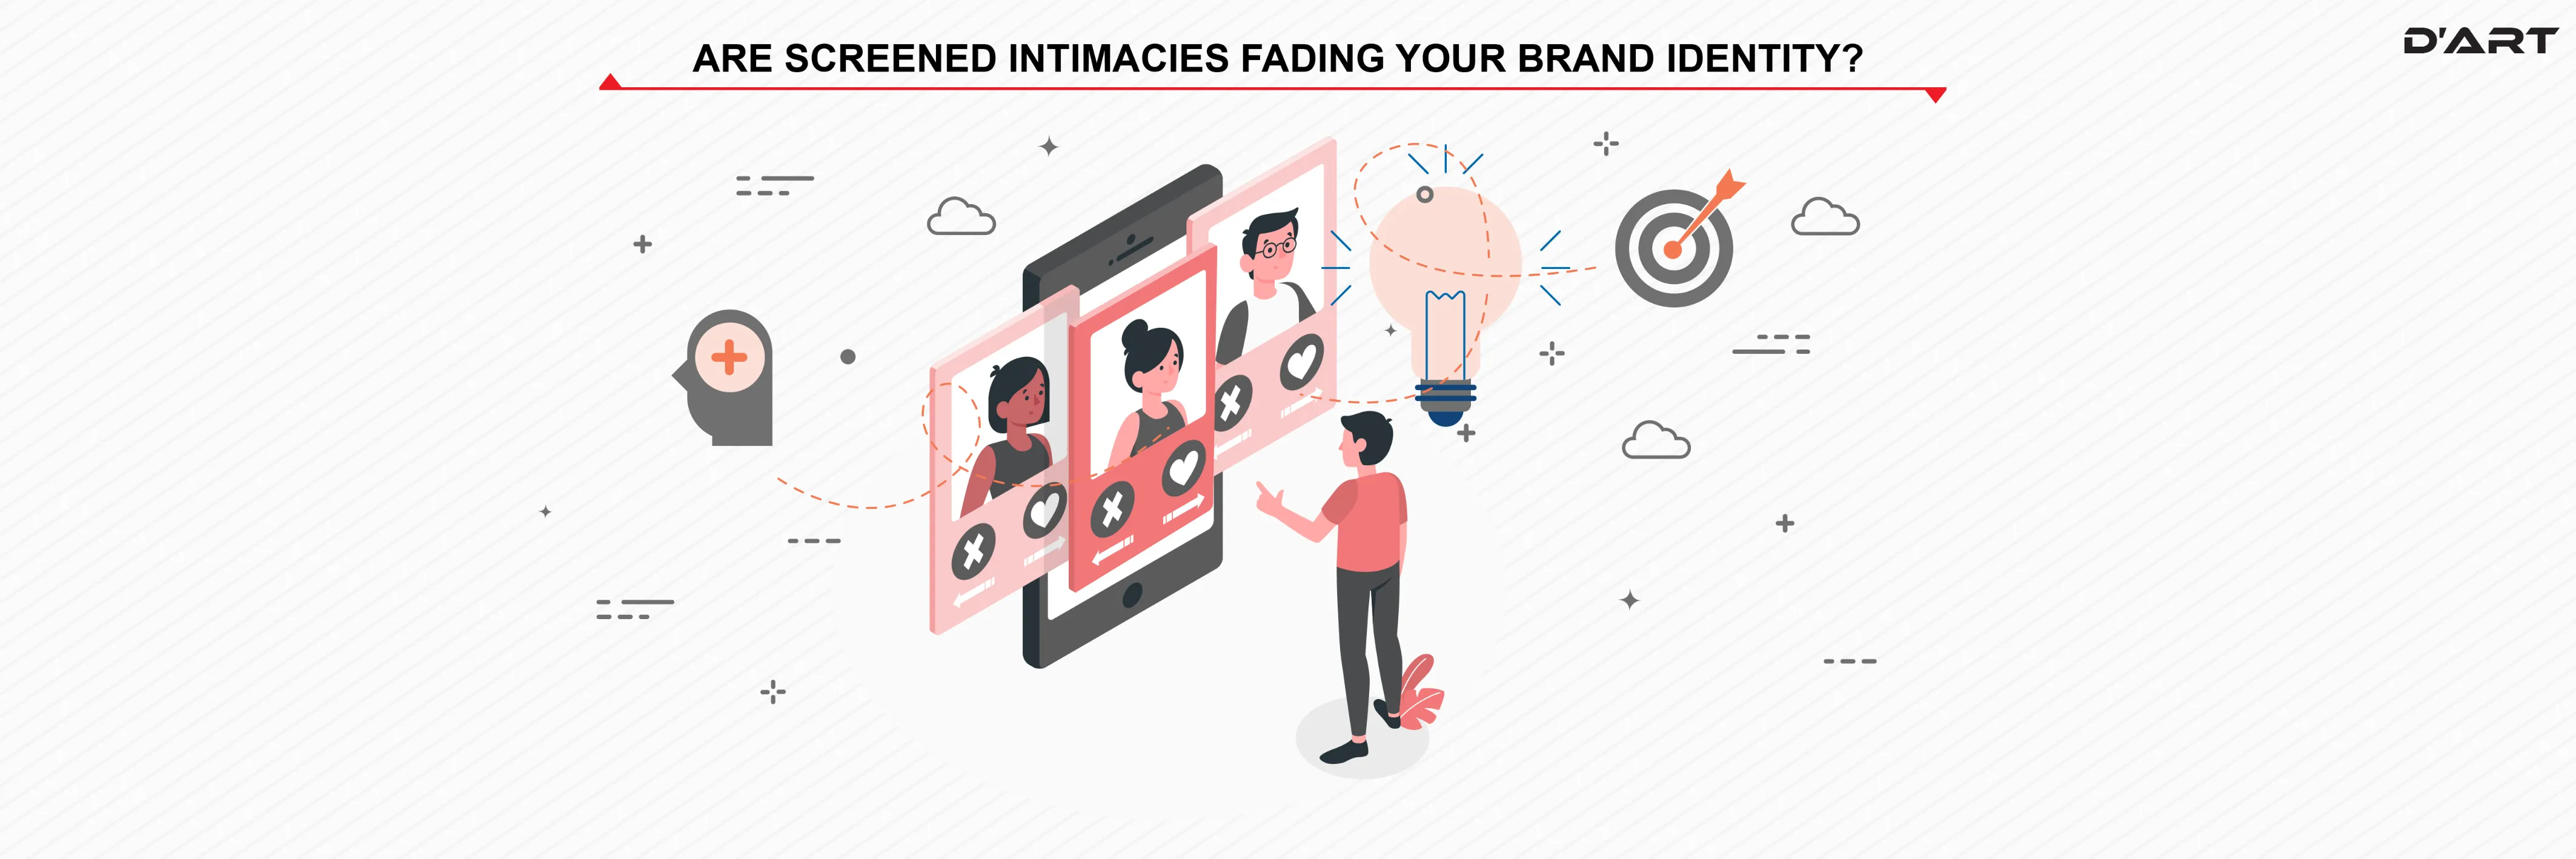 ARE SCREENED INTIMACIES FADING YOUR BRAND IDENTITY? | D'Art Design